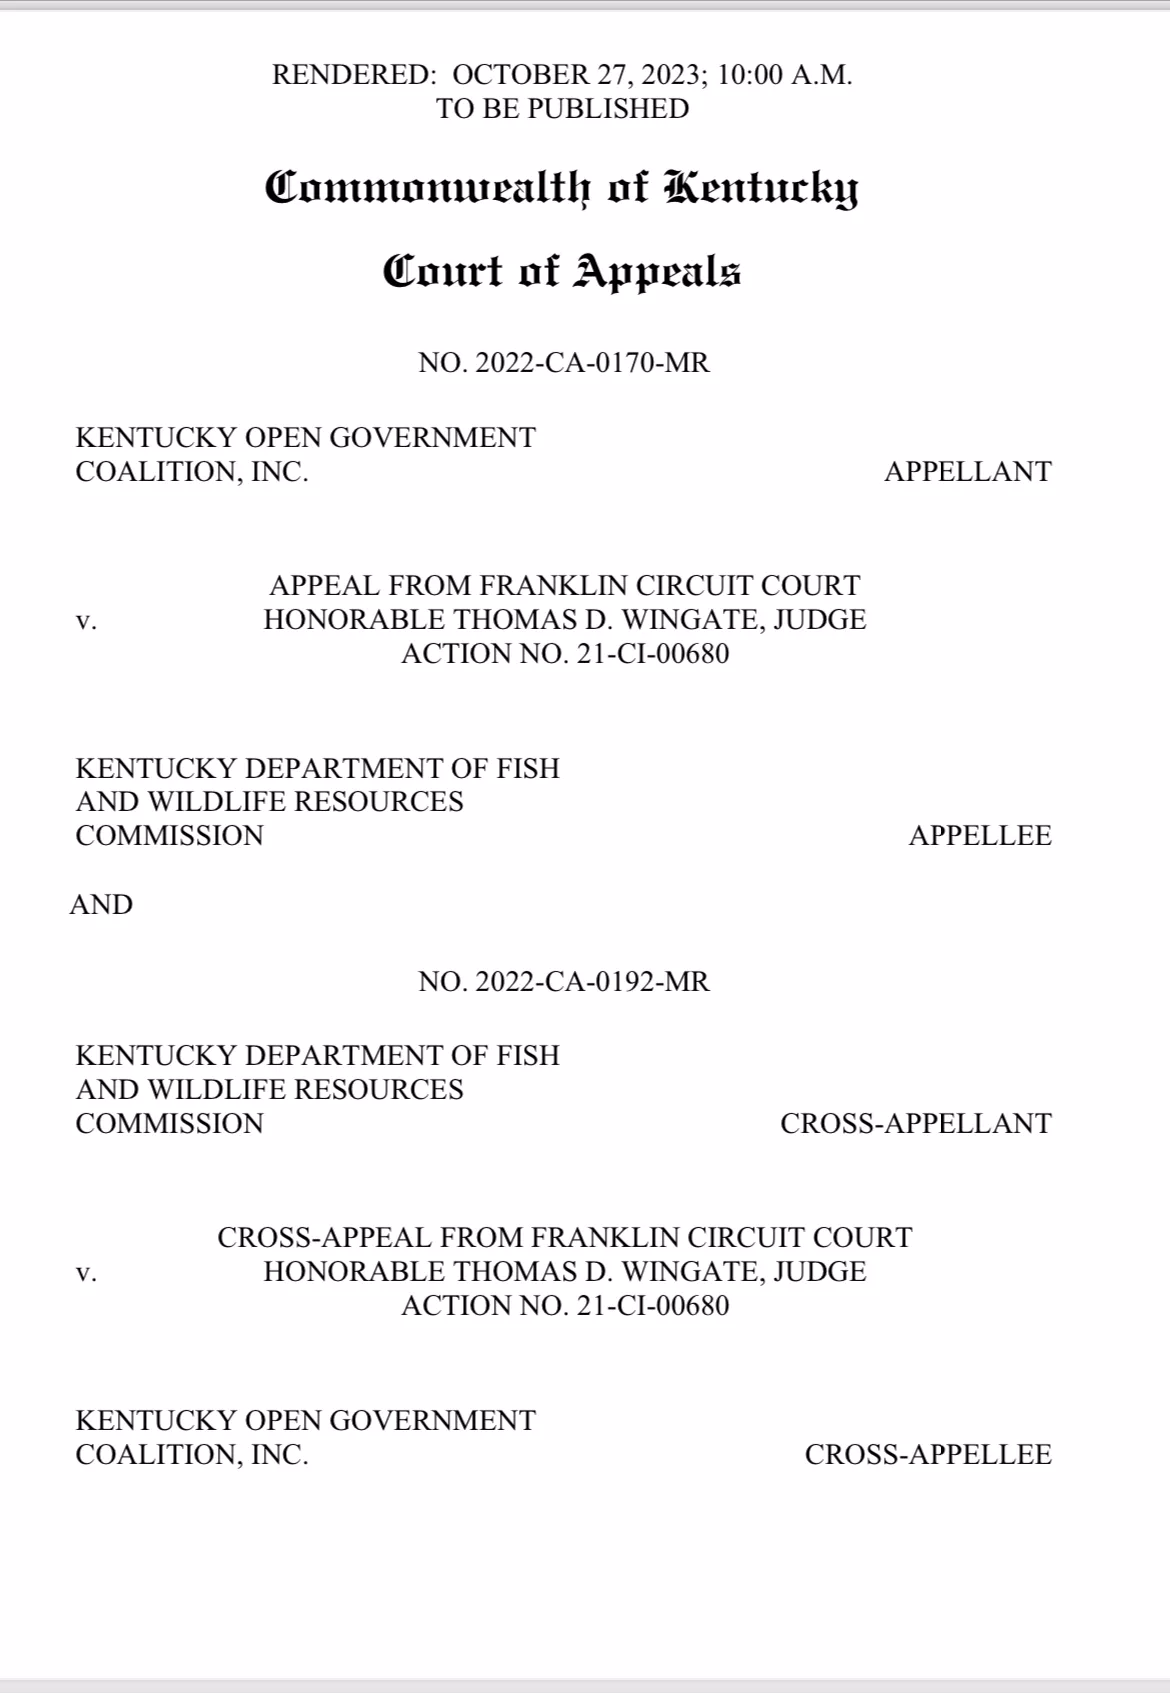 Kentucky Open Government Coalition's win in open records case is a victory for all Kentuckians